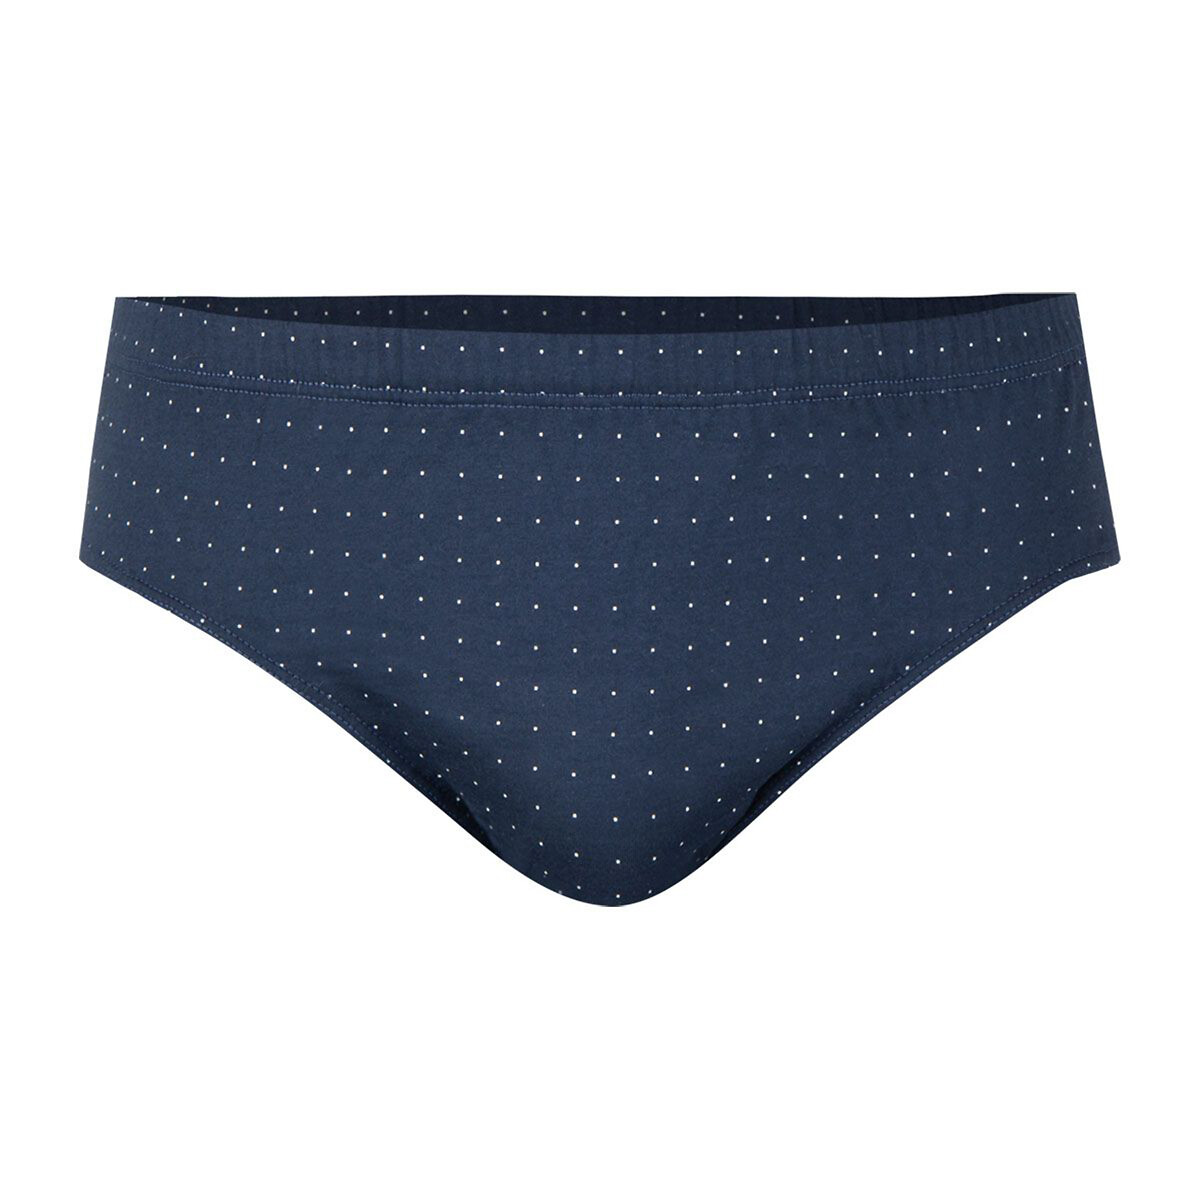 Image of Printed Cotton Briefs